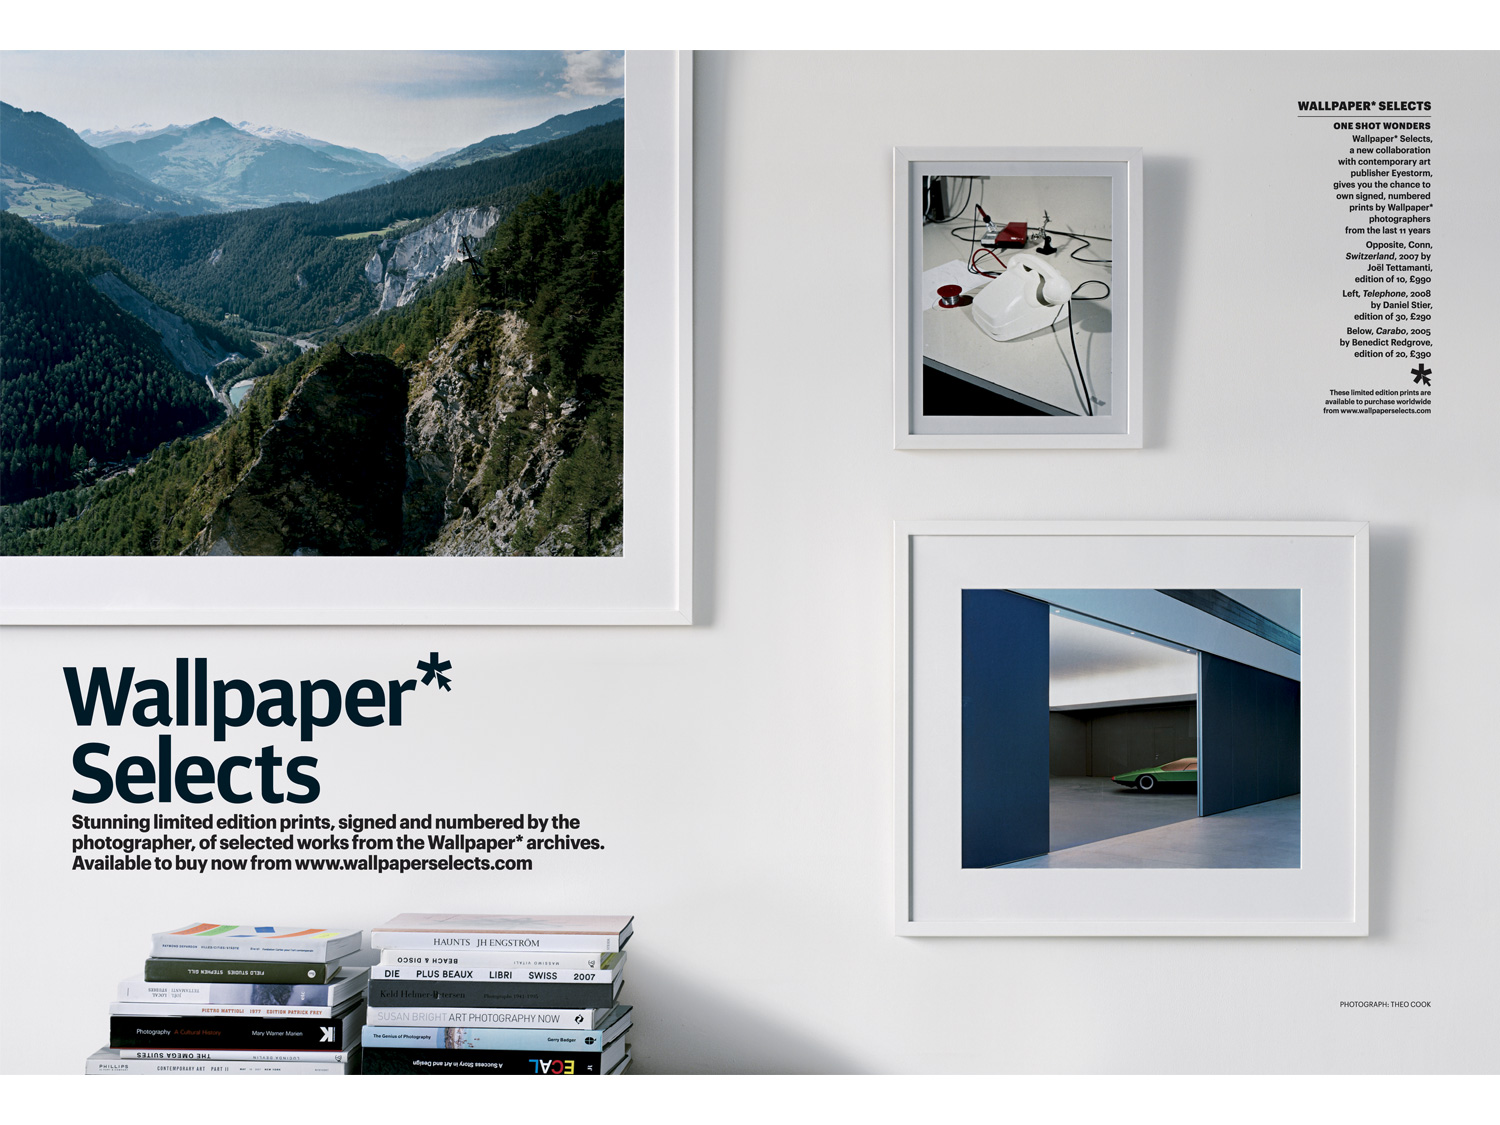 15/31 – Wallpaper Selects ad at Wallpaper*, photo: Theo Cook